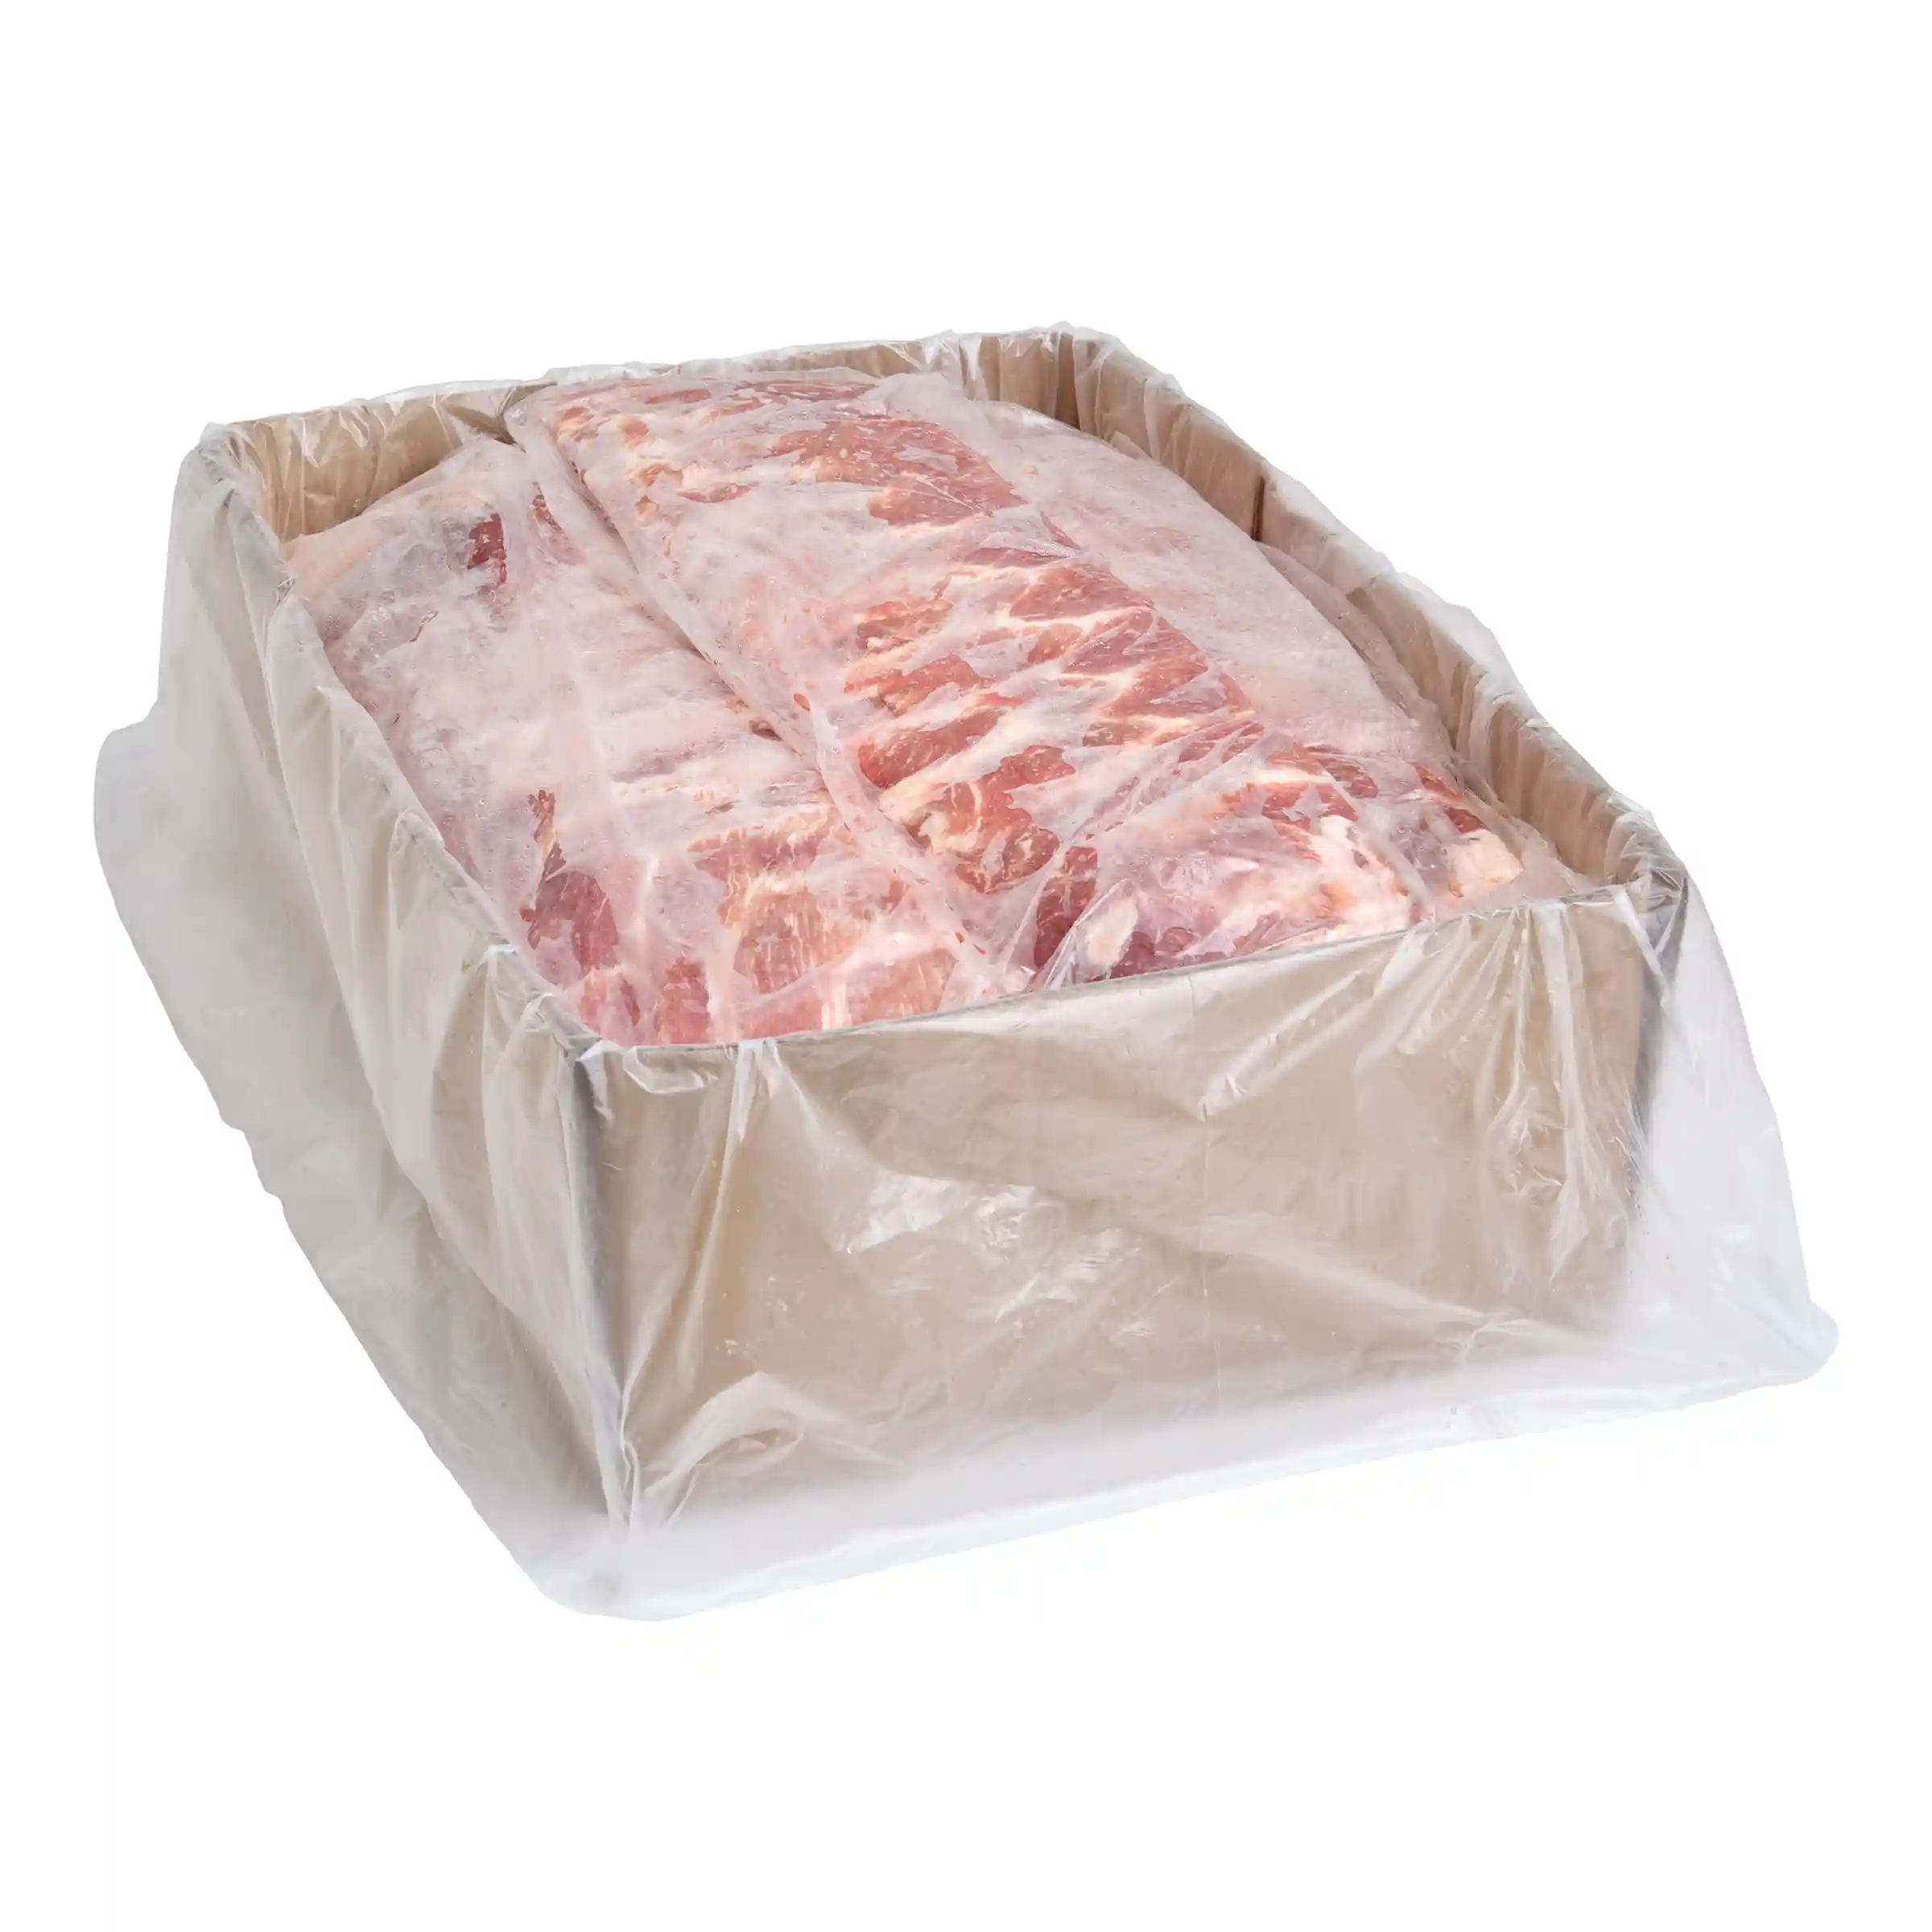 ibp Trusted Excellence® Brand St. Louis Style Ribs, 3.11 – 3.25 lbs_image_31